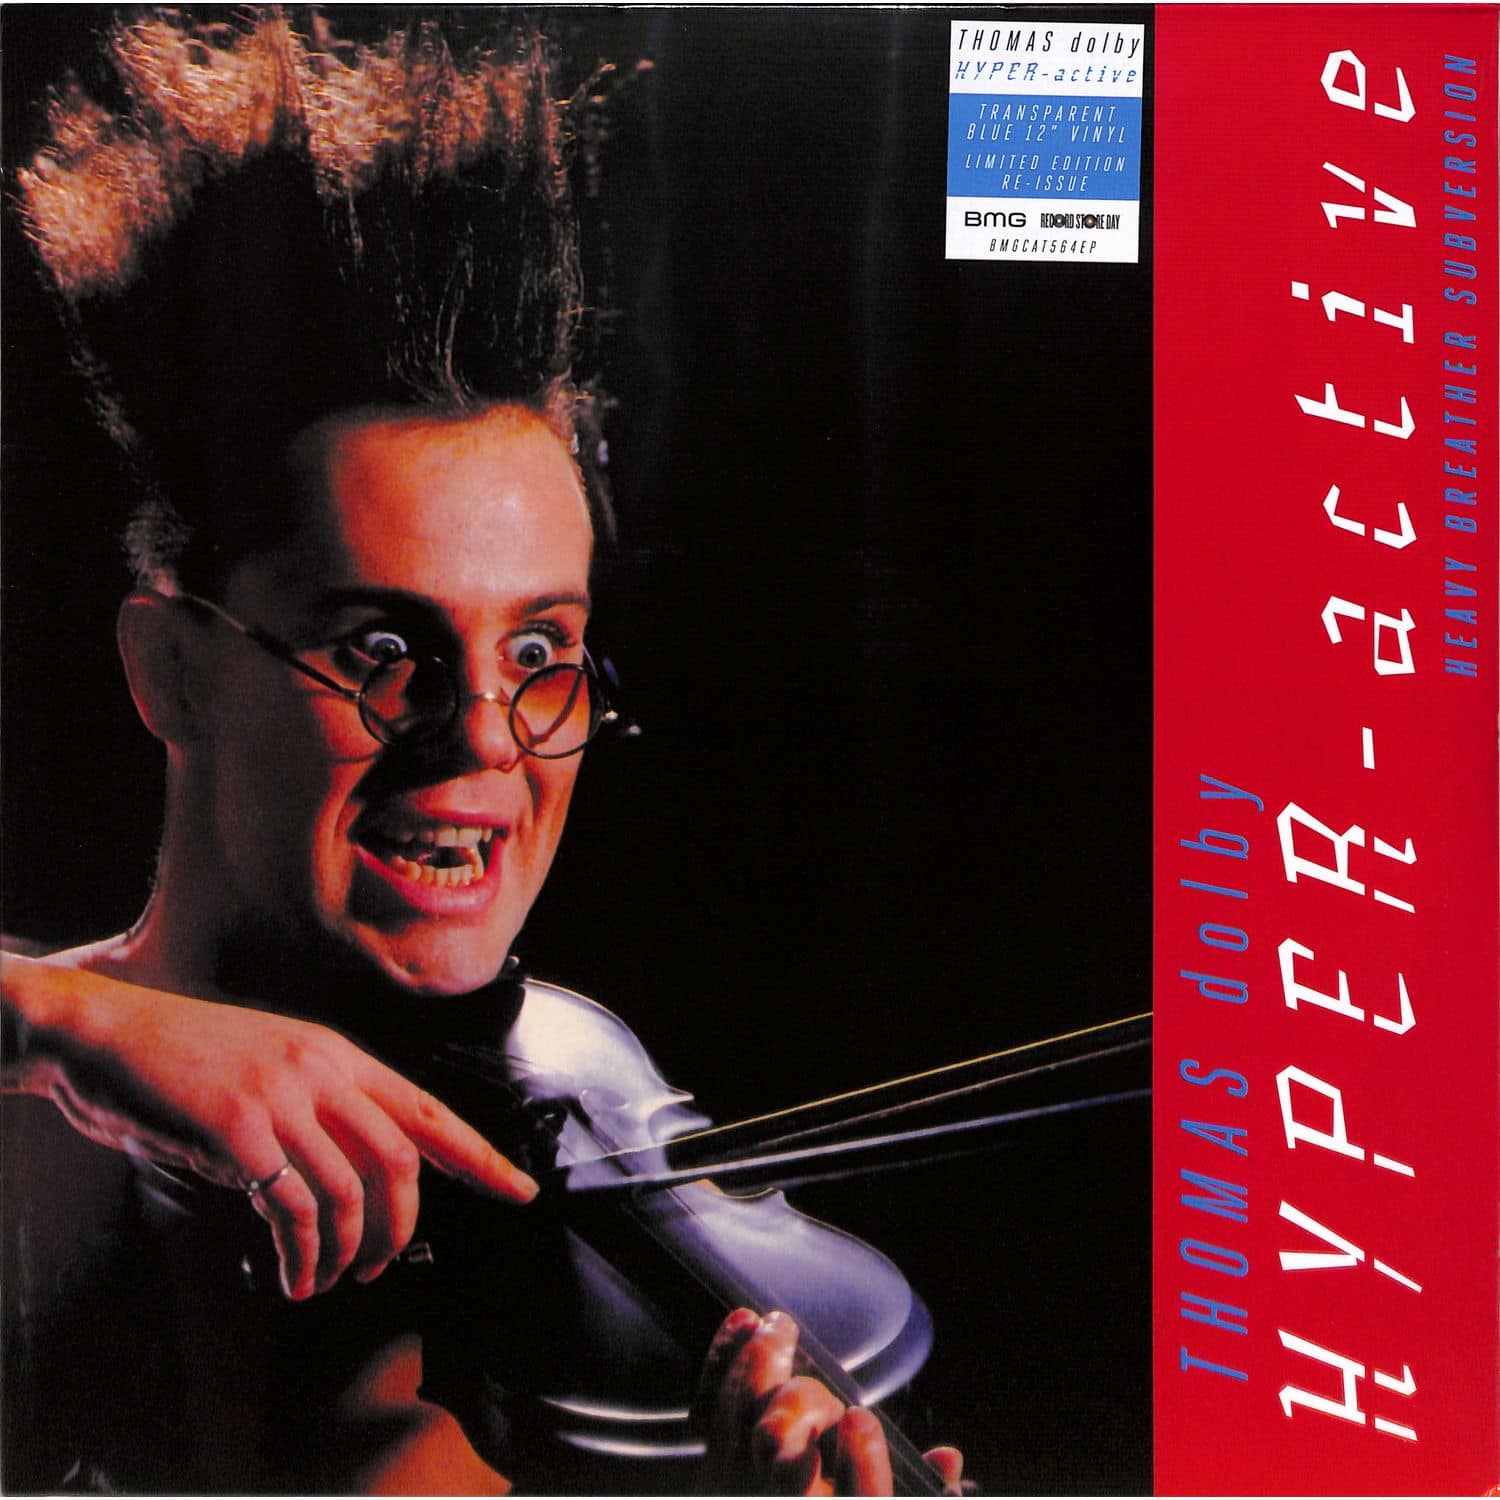 Thomas Dolby - HYPERACTIVE! 